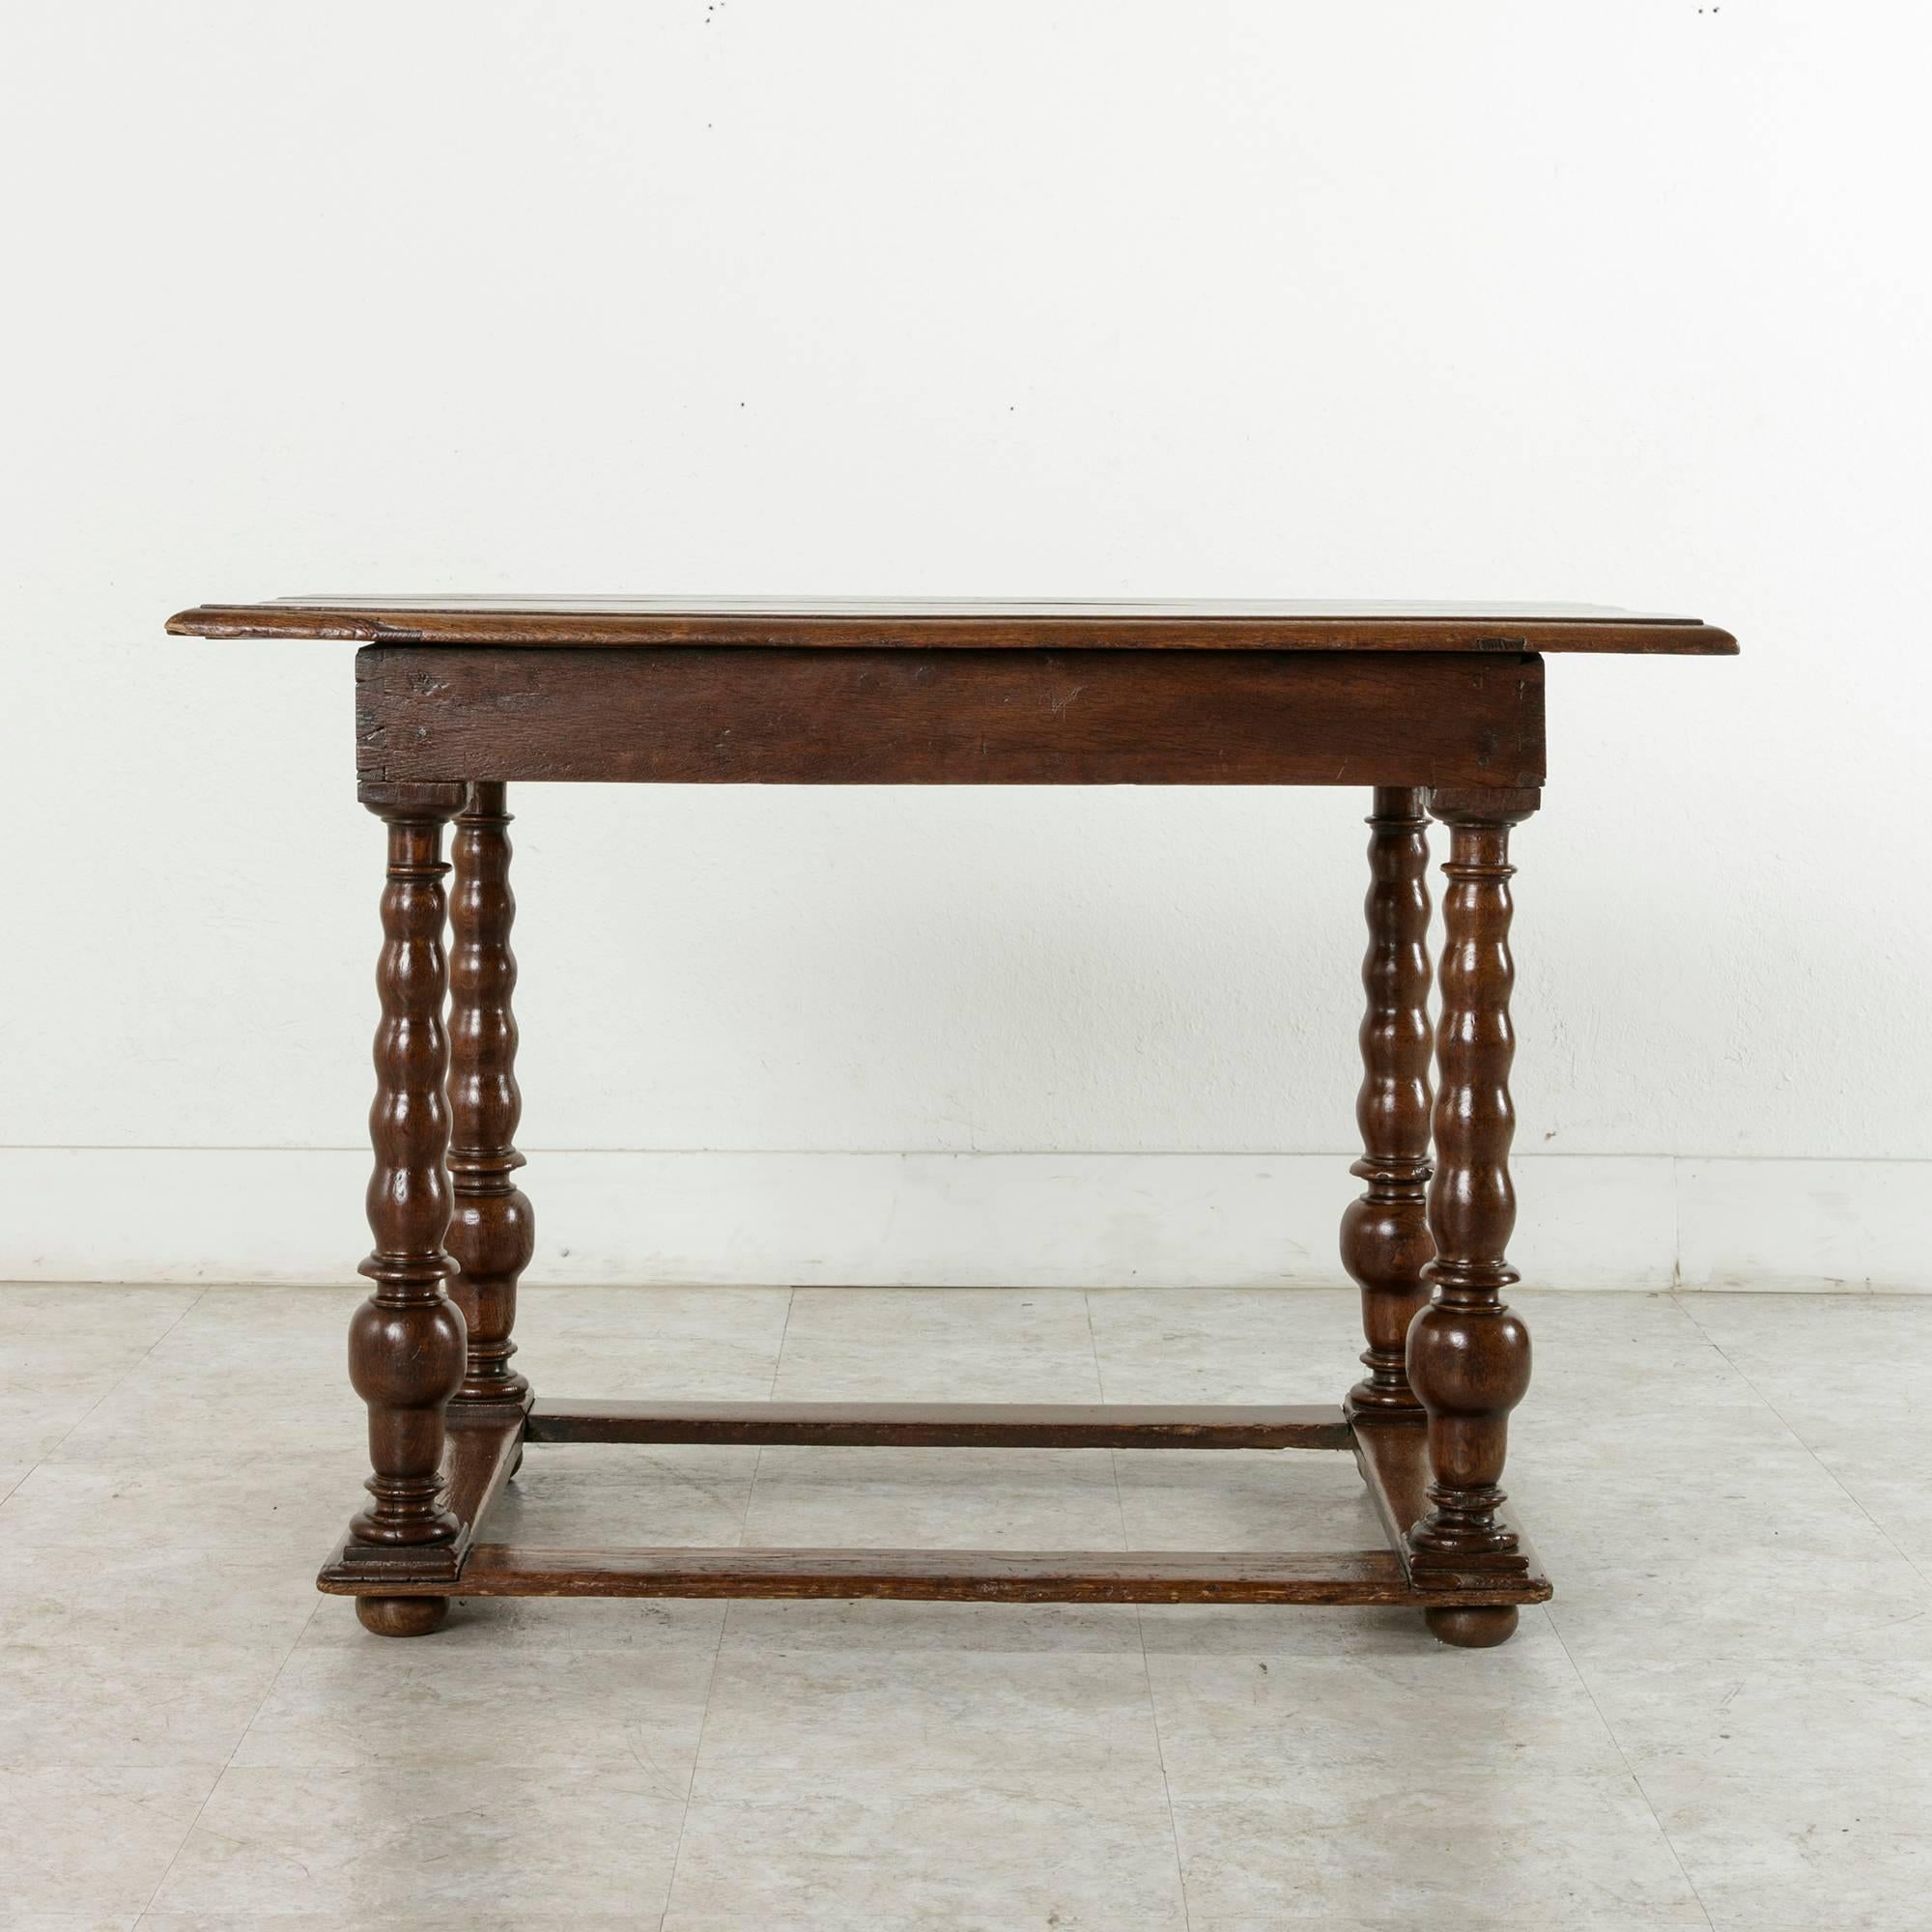 Late 17th Century 17th Century Louis XIII Period Oak Table with Spooled Legs and Single Drawer